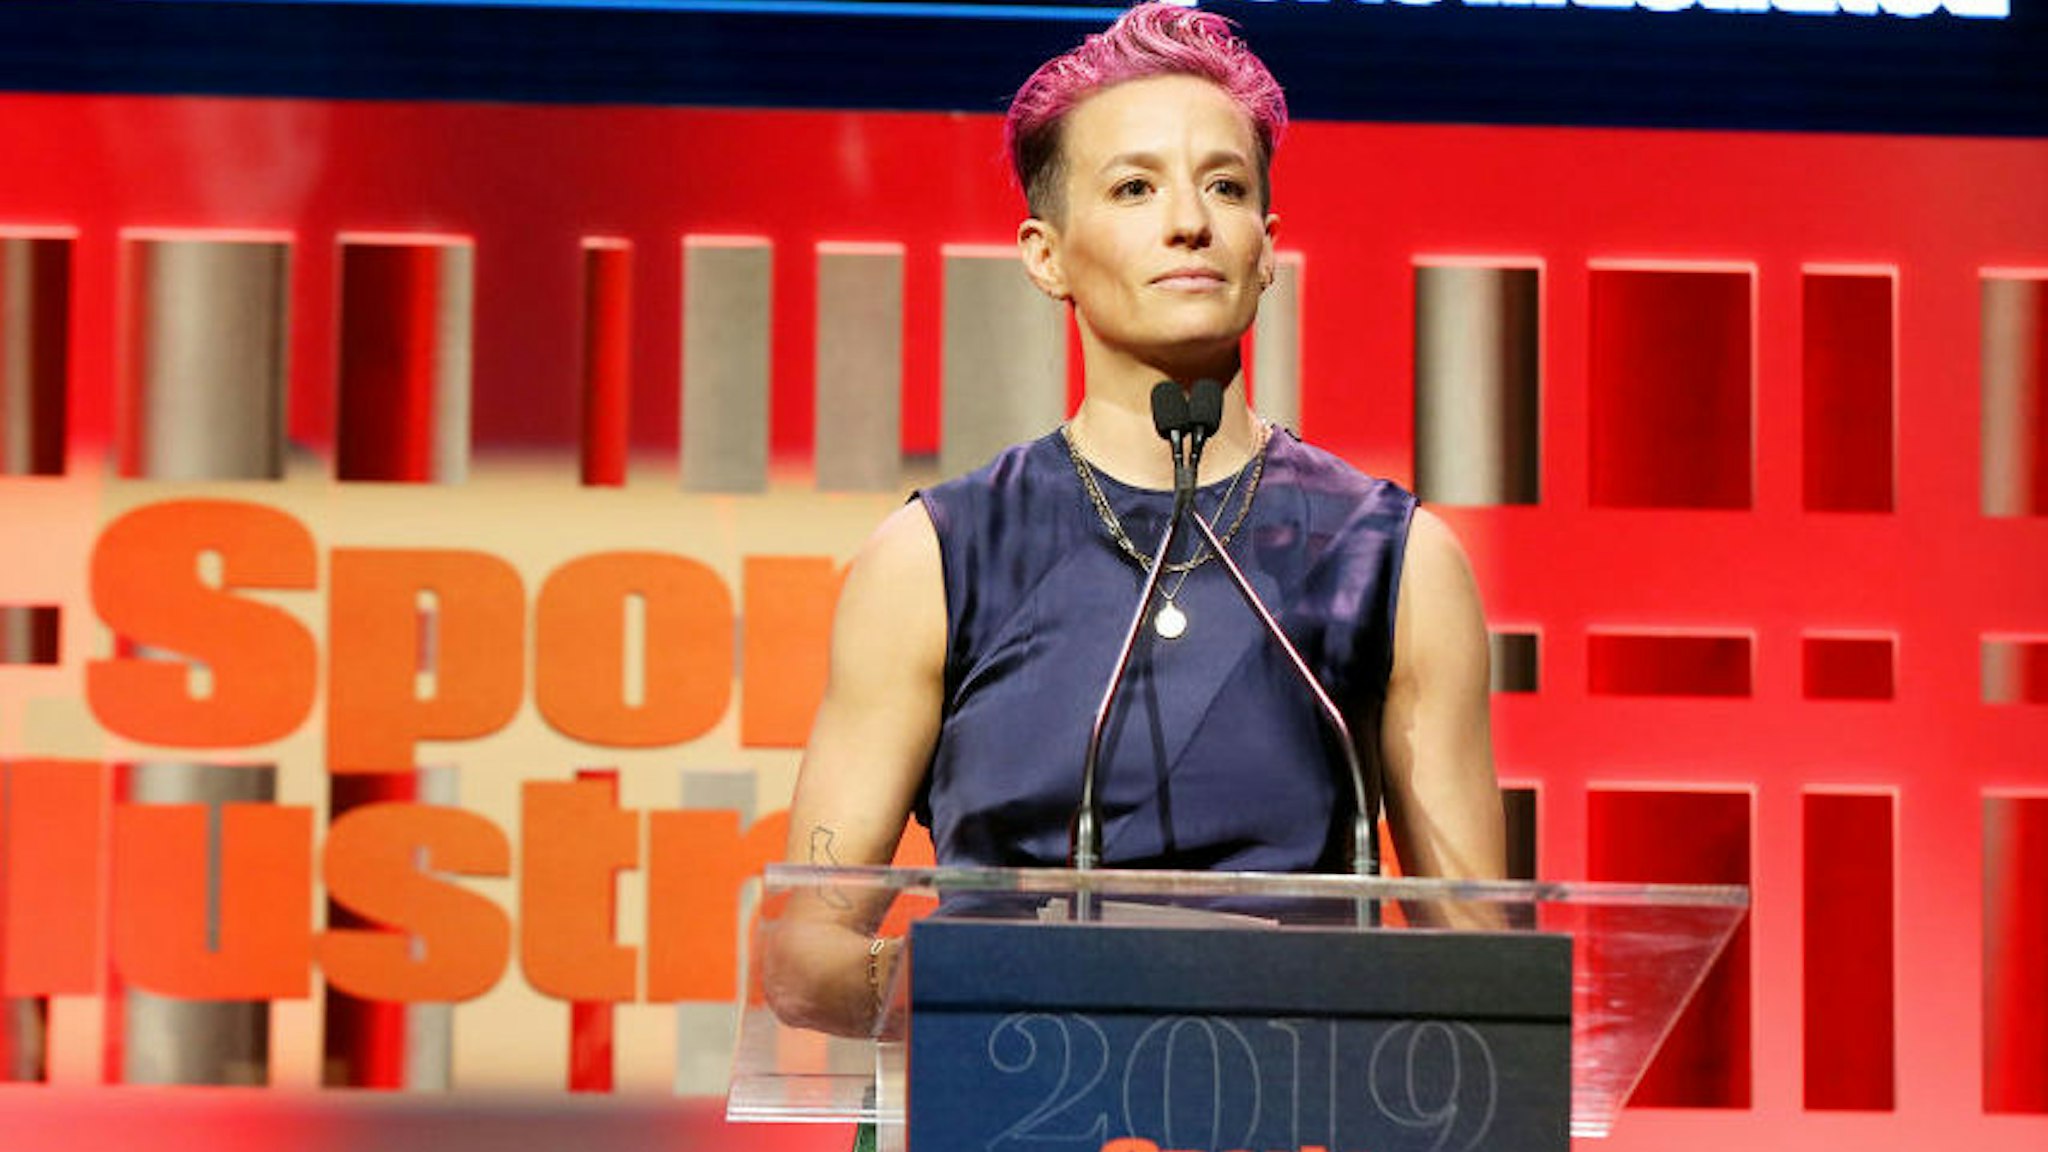 NEW YORK, NEW YORK - DECEMBER 09: Sports Illustrated Sportsperson of the Year Award Winner Megan Rapinoe speaks onstage during the Sports Illustrated Sportsperson Of The Year 2019 at The Ziegfeld Ballroom on December 09, 2019 in New York City.